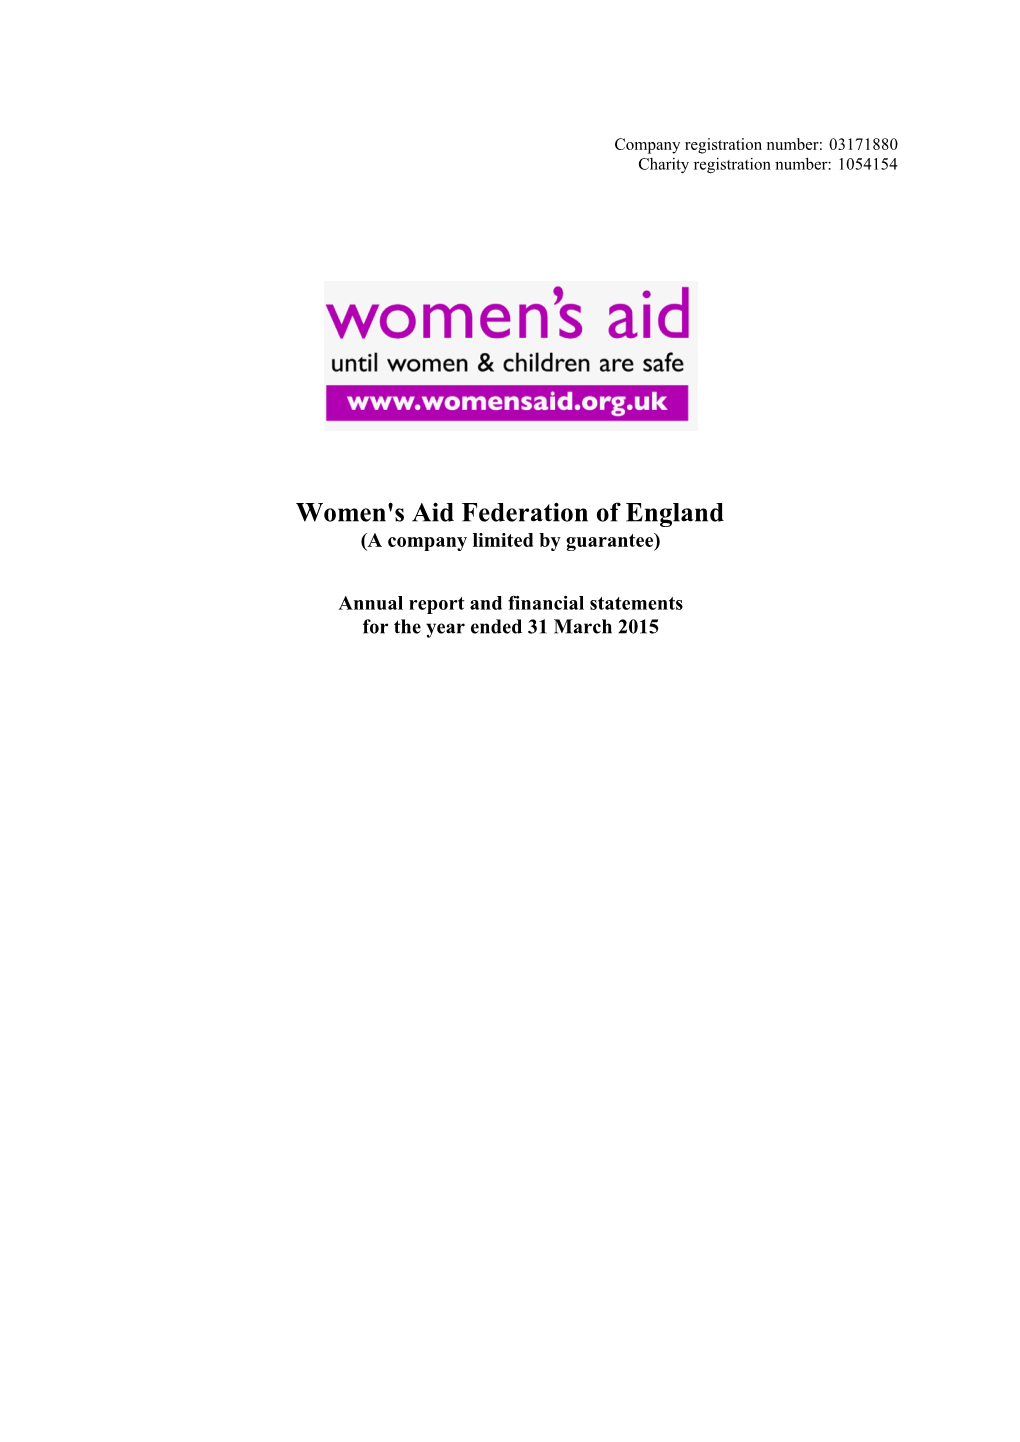 Women's Aid Federation of England (A Company Limited by Guarantee)